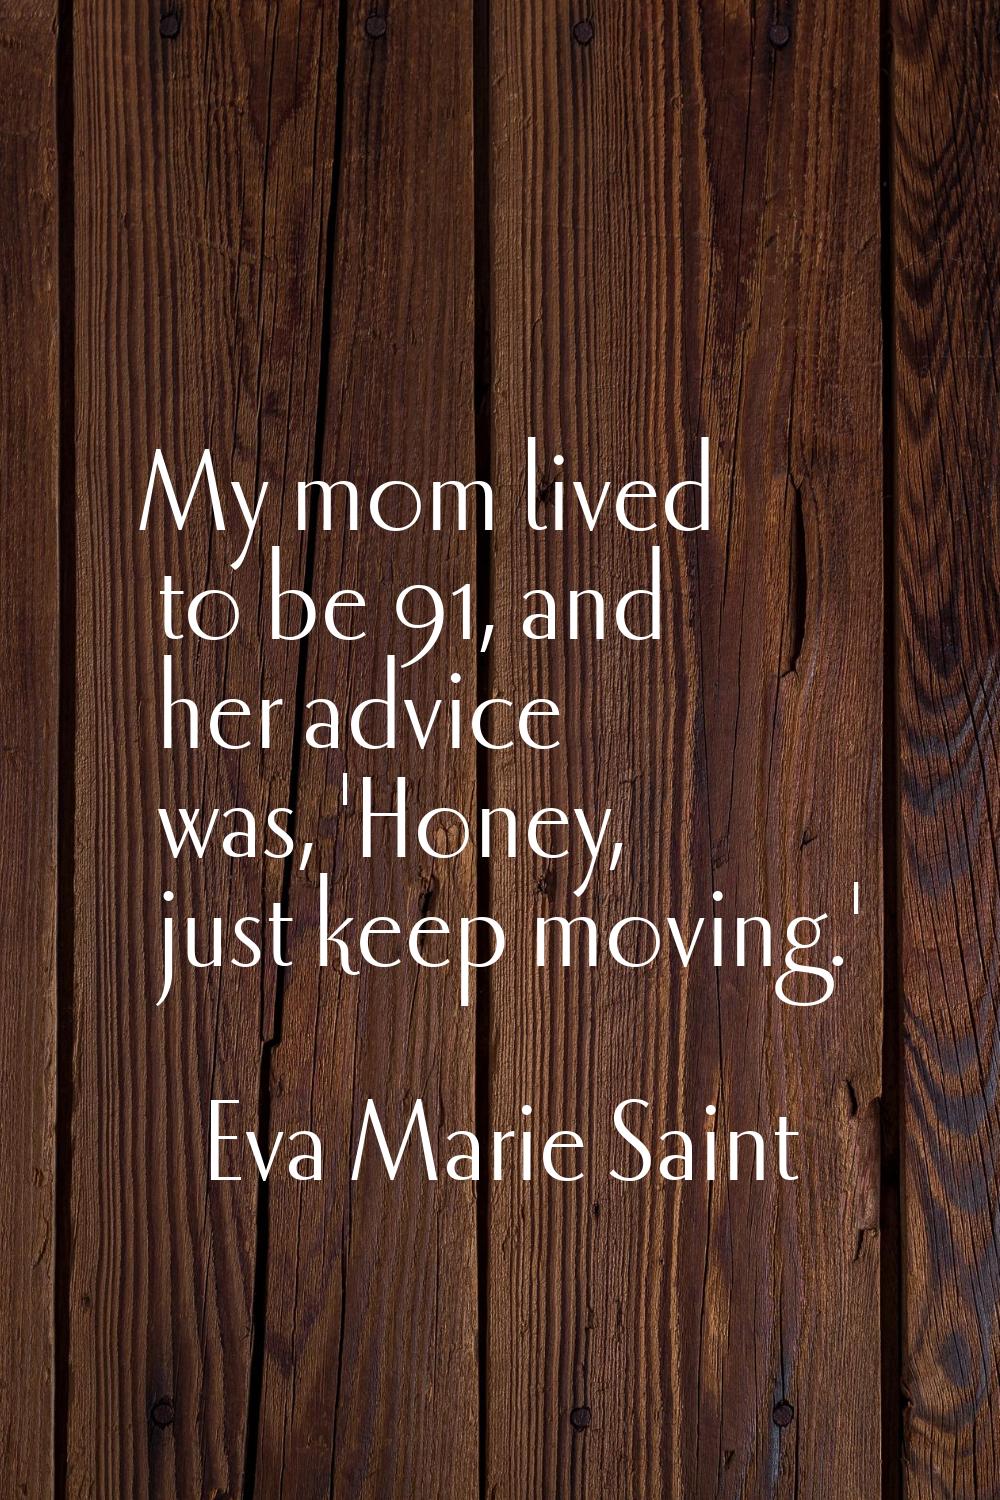 My mom lived to be 91, and her advice was, 'Honey, just keep moving.'